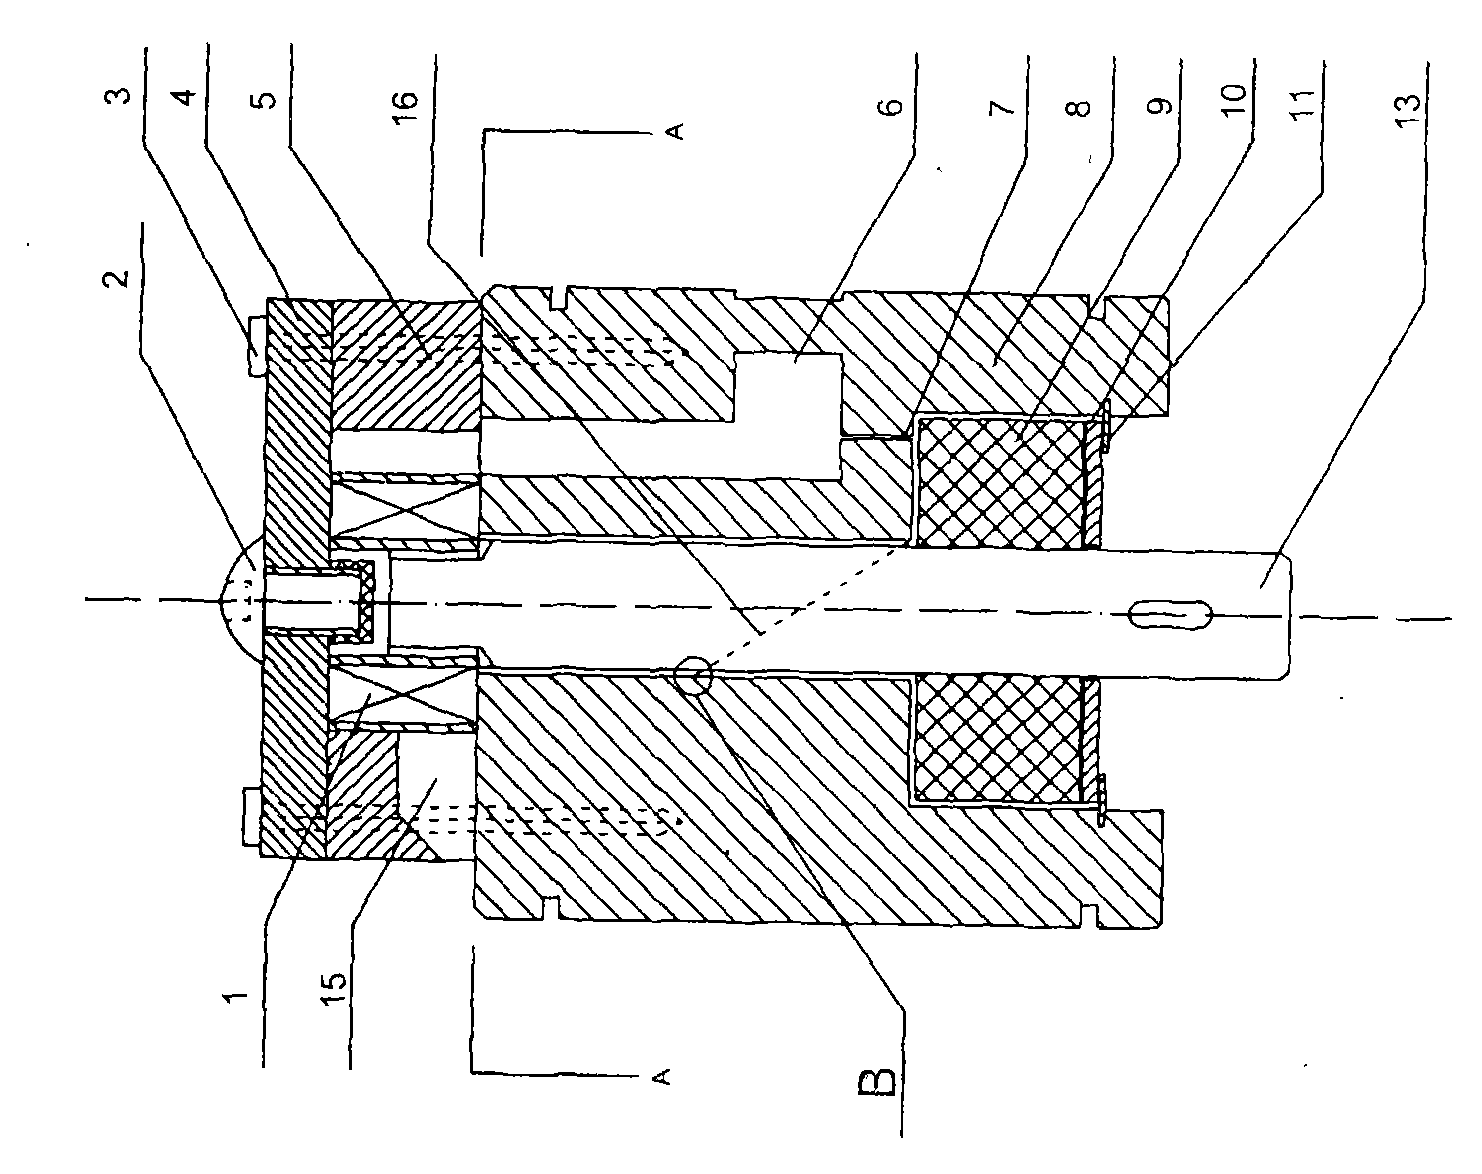 Single-stage blade pump for dimethyl ether vehicle